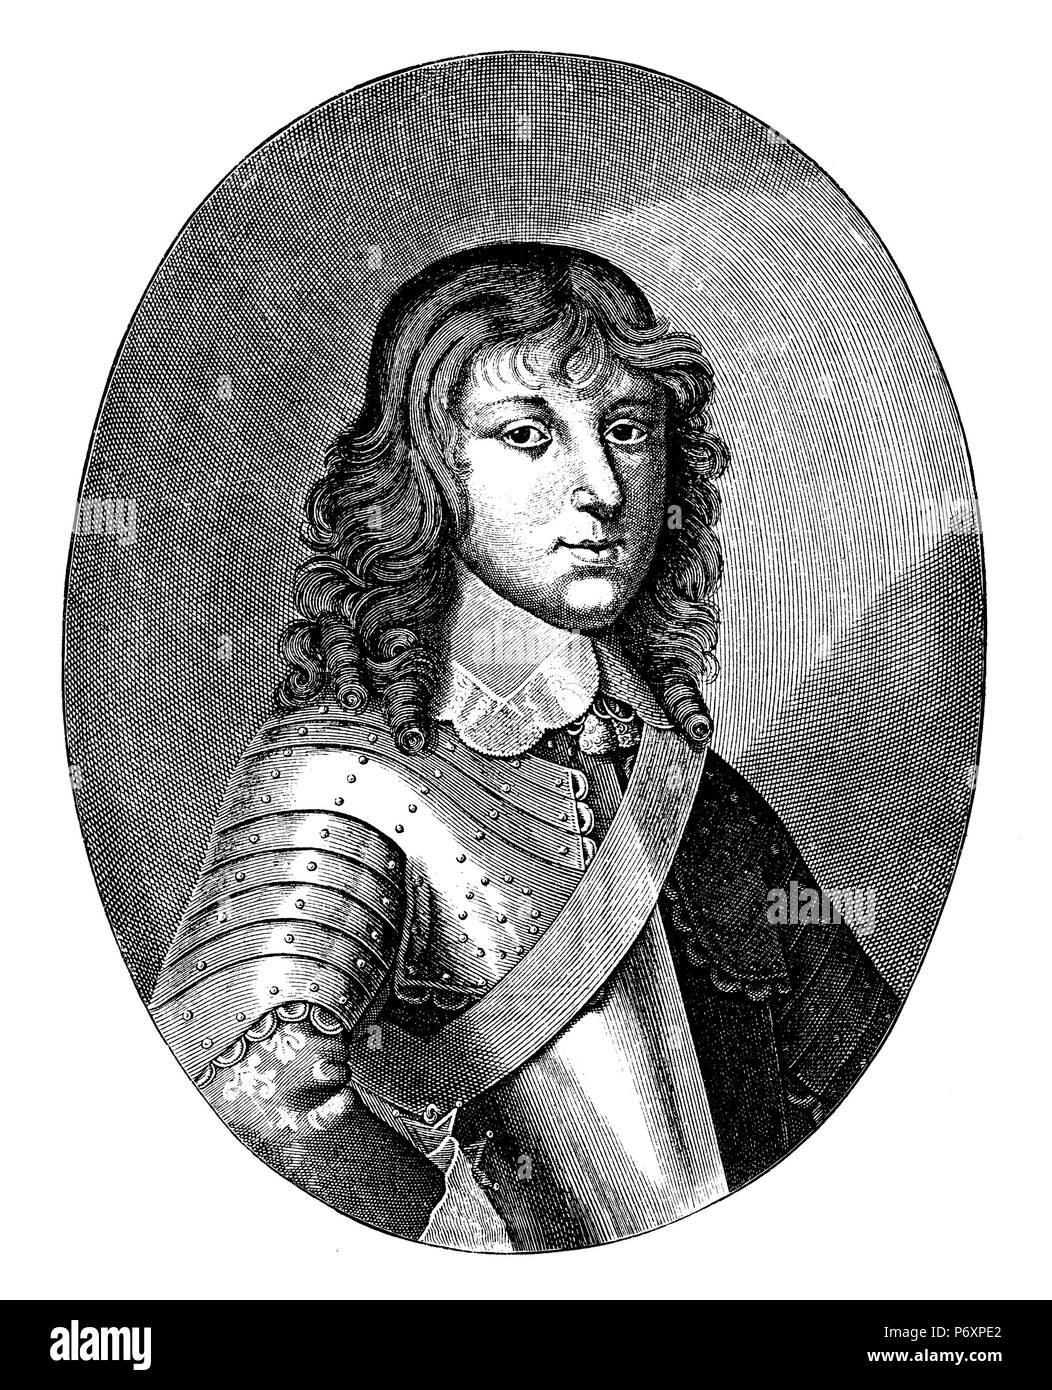 Louis XIV King of France as young man. After a painting by MIgnard engraved by Nicolas de Boilly, Stock Photo